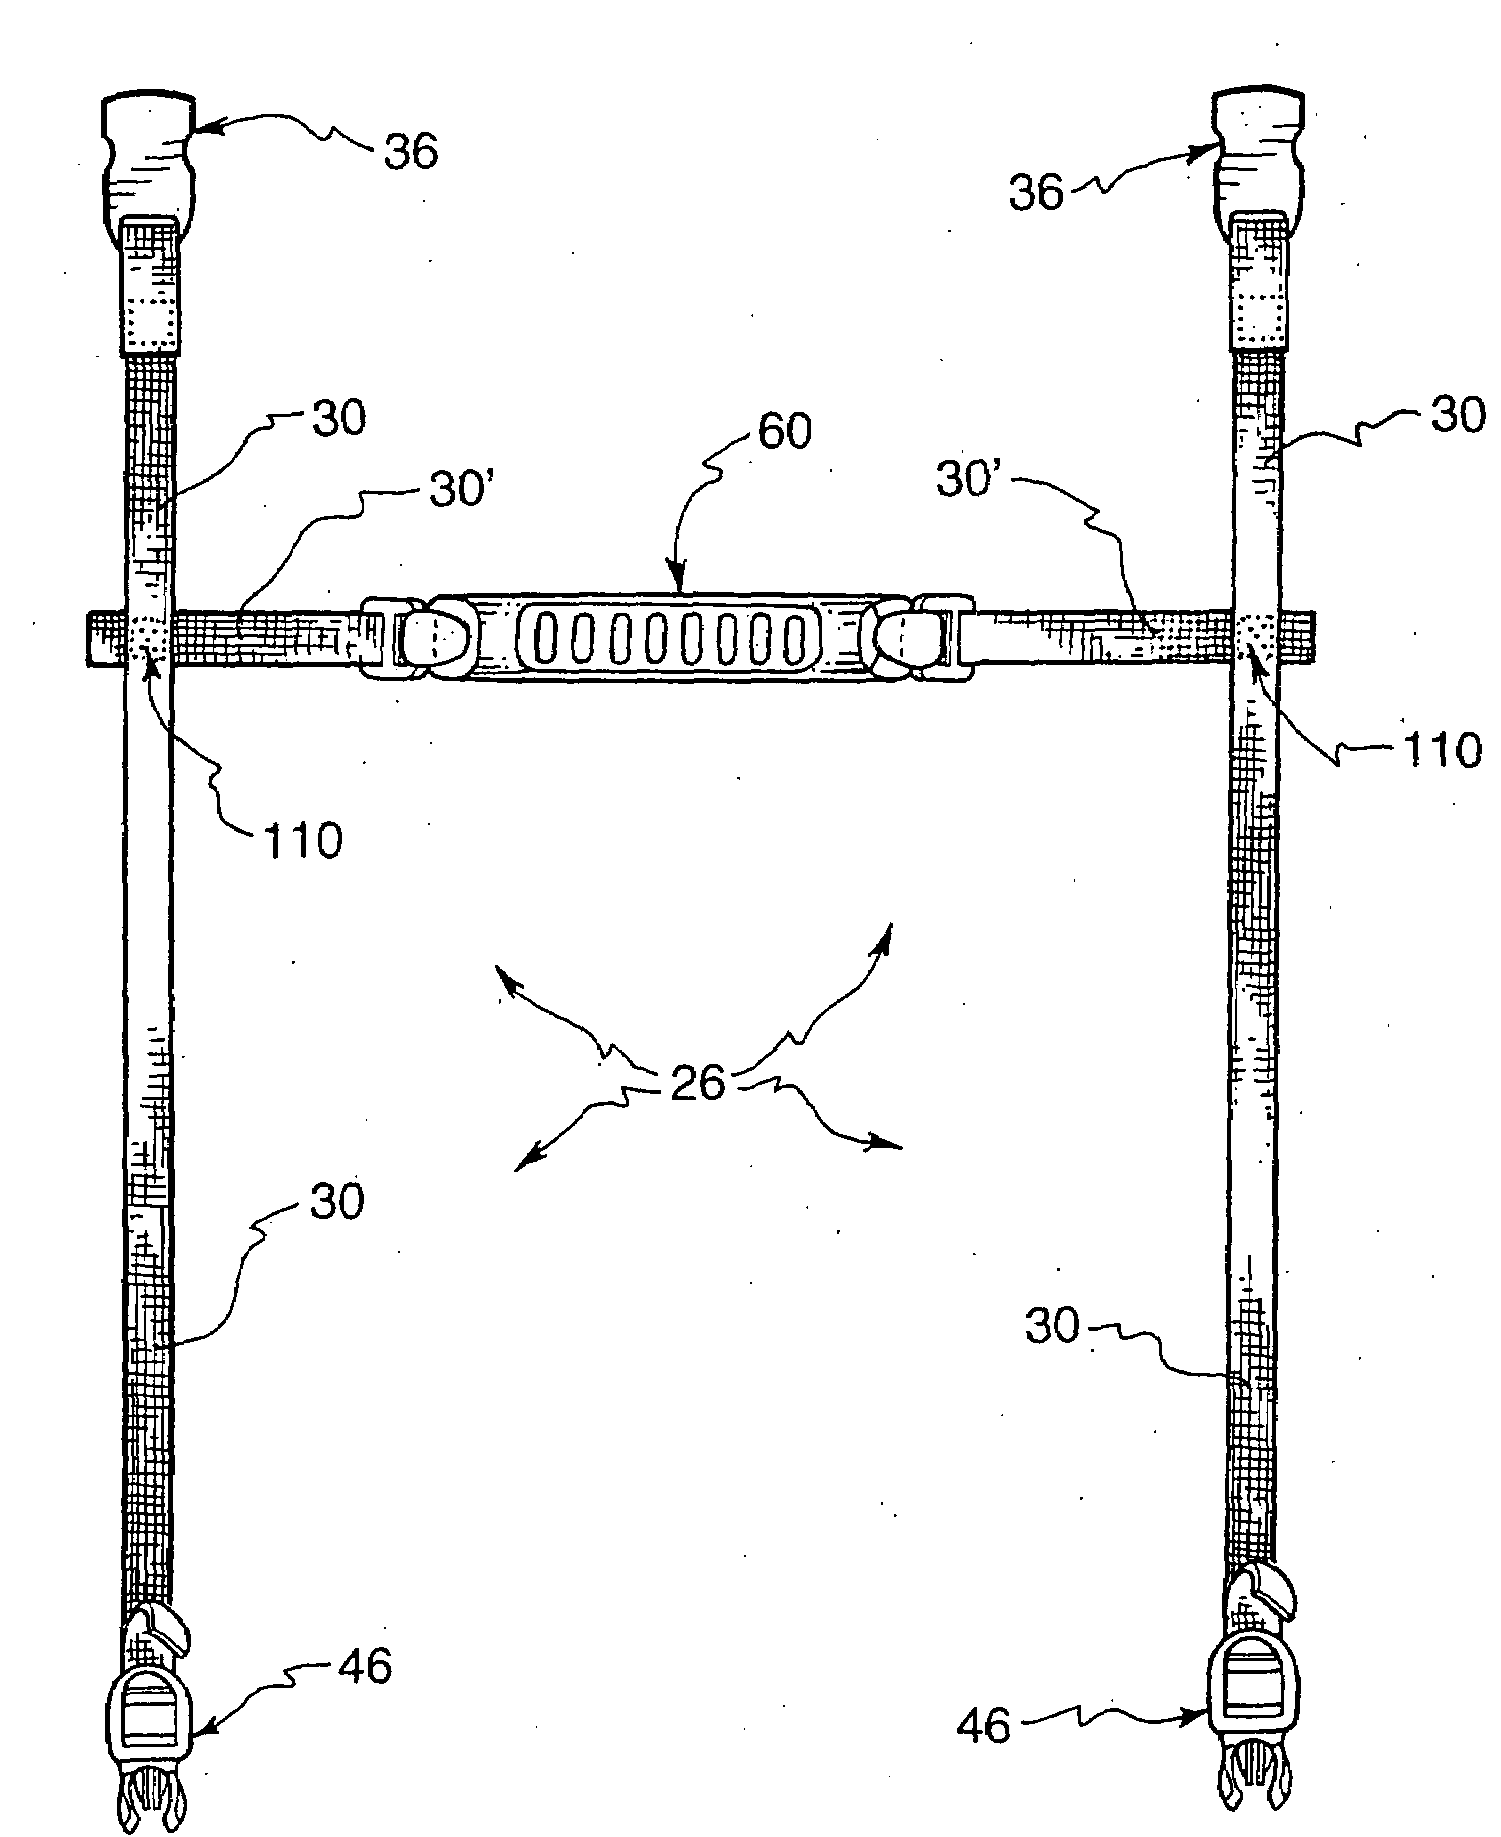 Reusable, adjustable carriers for toting awkward handle-less items and related methods